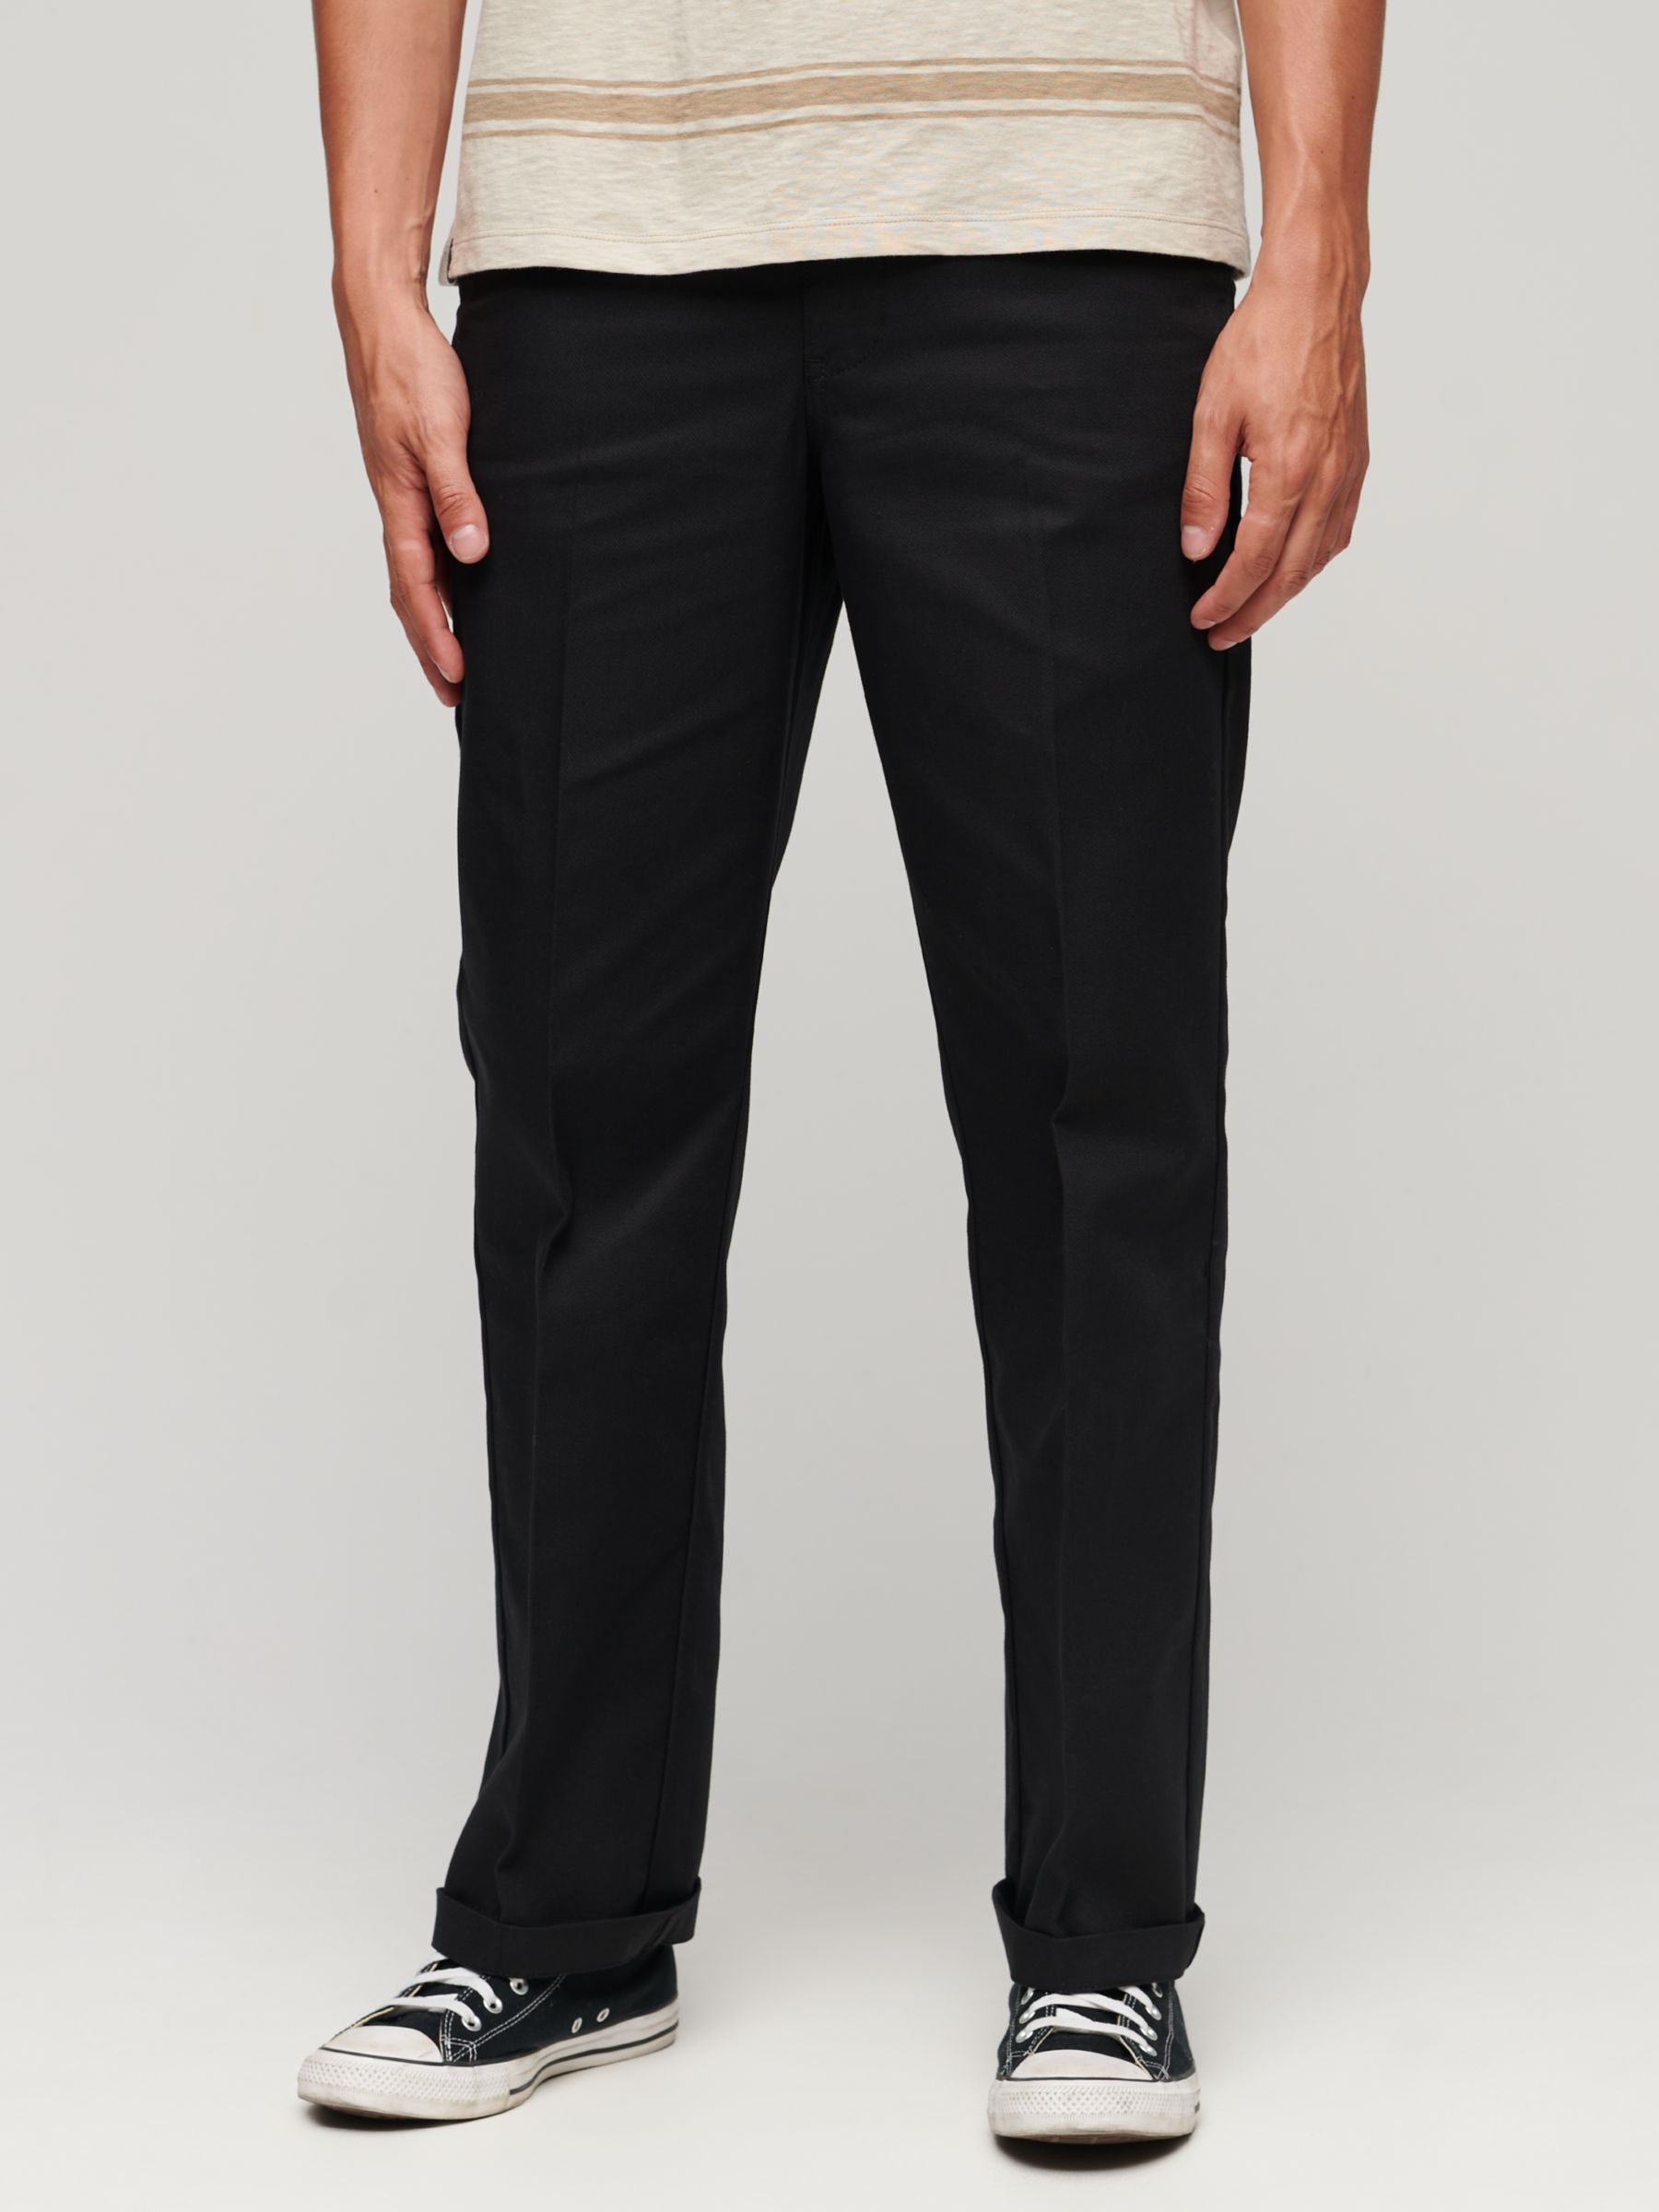 Superdry Straight Chino Trousers, Black at John Lewis & Partners